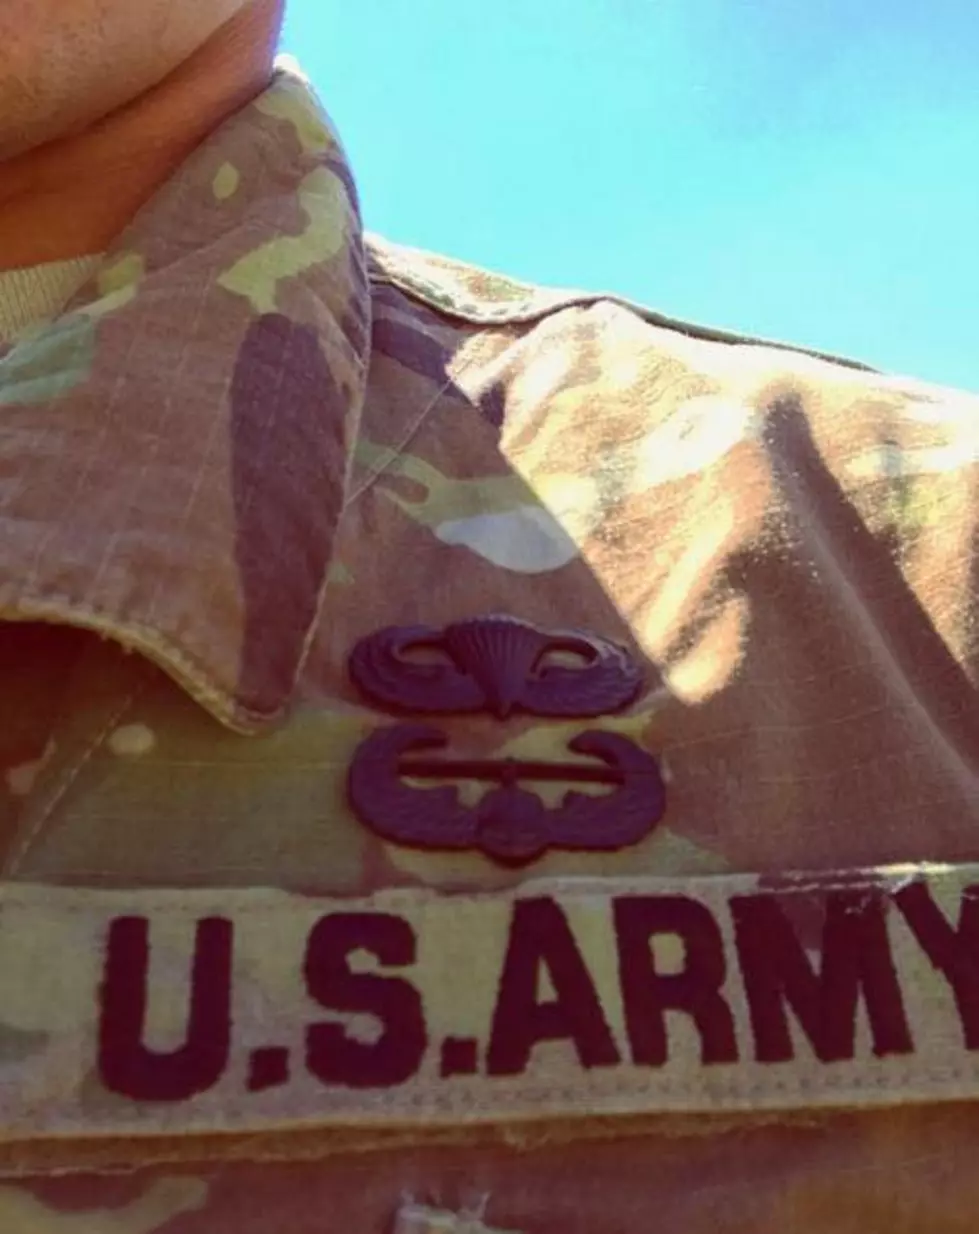 My Son Successfully Completed Another Course in the U.S. Army [PHOTOS]